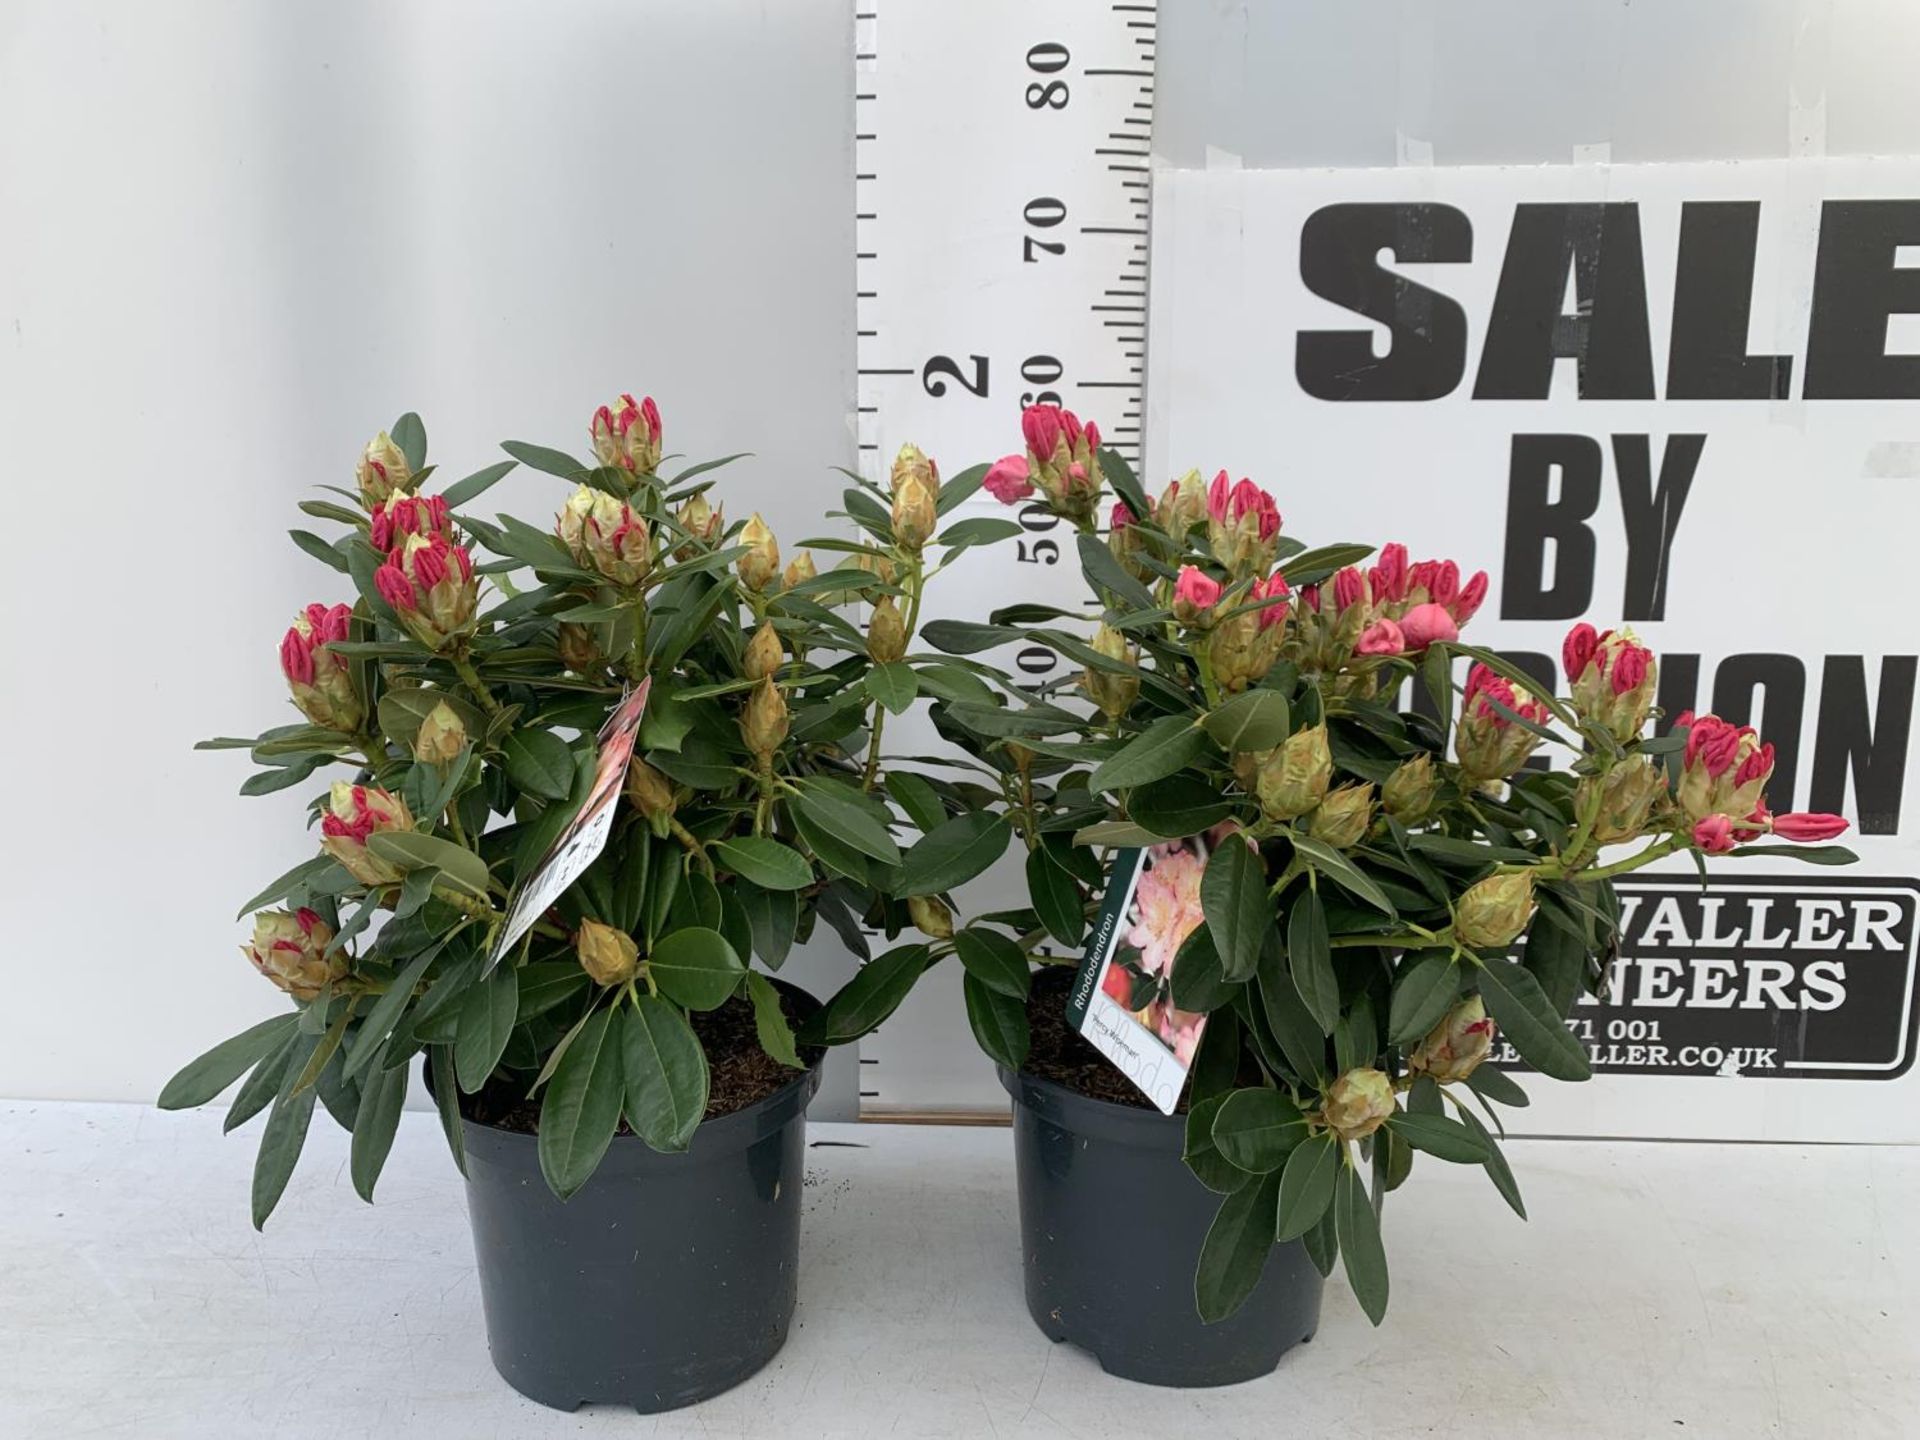 TWO RHODODENDRONS RED 'PERCY WISEMAN' IN 5 LTR POTS 60CM TALL PLUS VAT TO BE SOLD FOR THE TWO